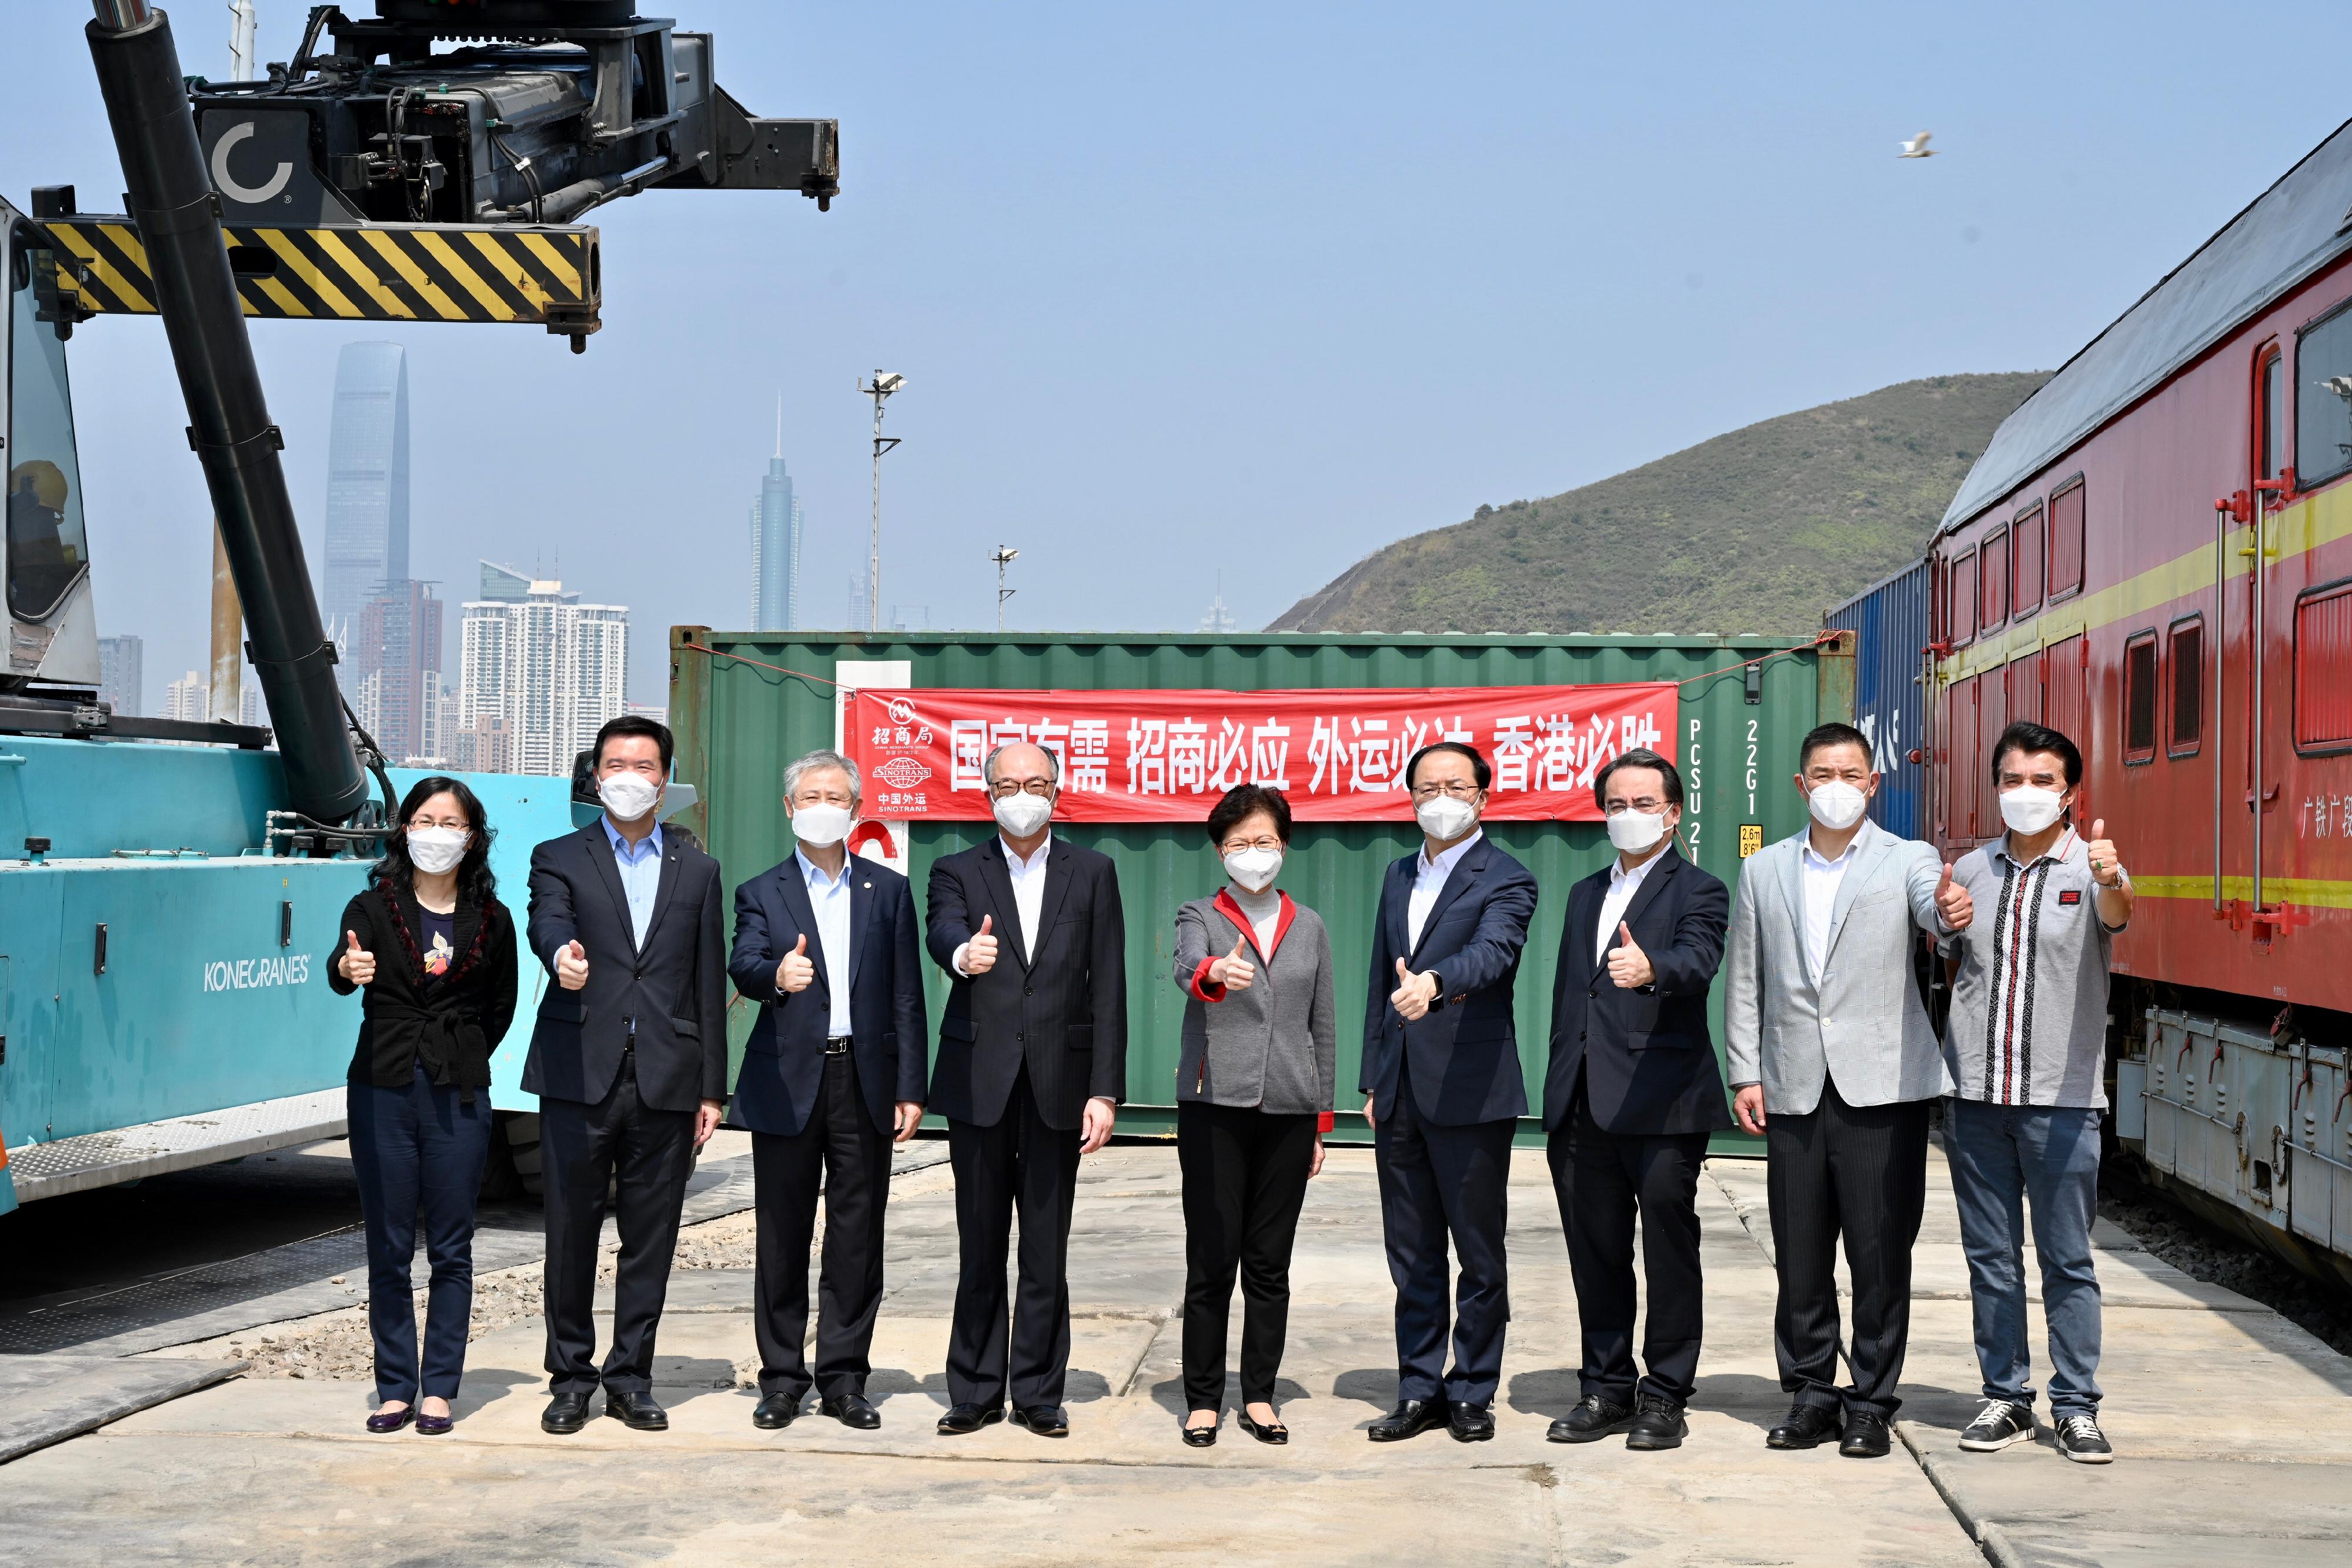 The railway transportation of goods from the Mainland to Hong Kong commenced today (March 2) with the first train carrying anti-epidemic supplies arriving at Hong Kong this morning. Photo shows the Chief Executive, Mrs Carrie Lam (centre); the Secretary for Transport and Housing, Mr Frank Chan Fan (fourth left); the Director General of the Youth Department of the Liaison Office of the Central People’s Government in the Hong Kong Special Administrative Region, Mr Zhang Zhihua (fourth right); the Permanent Secretary for Transport and Housing (Transport), Ms Mable Chan (first left); the Chief Executive Officer of MTR Corporation Limited, Dr Jacob Kam (third right); the Assistant President of the China Merchants Group Limited, Mr Chu Zongsheng (third left); the Managing Director of the China Merchants Port Holdings Company Limited, Mr Yim Kong (second left), and other personnel at the site.